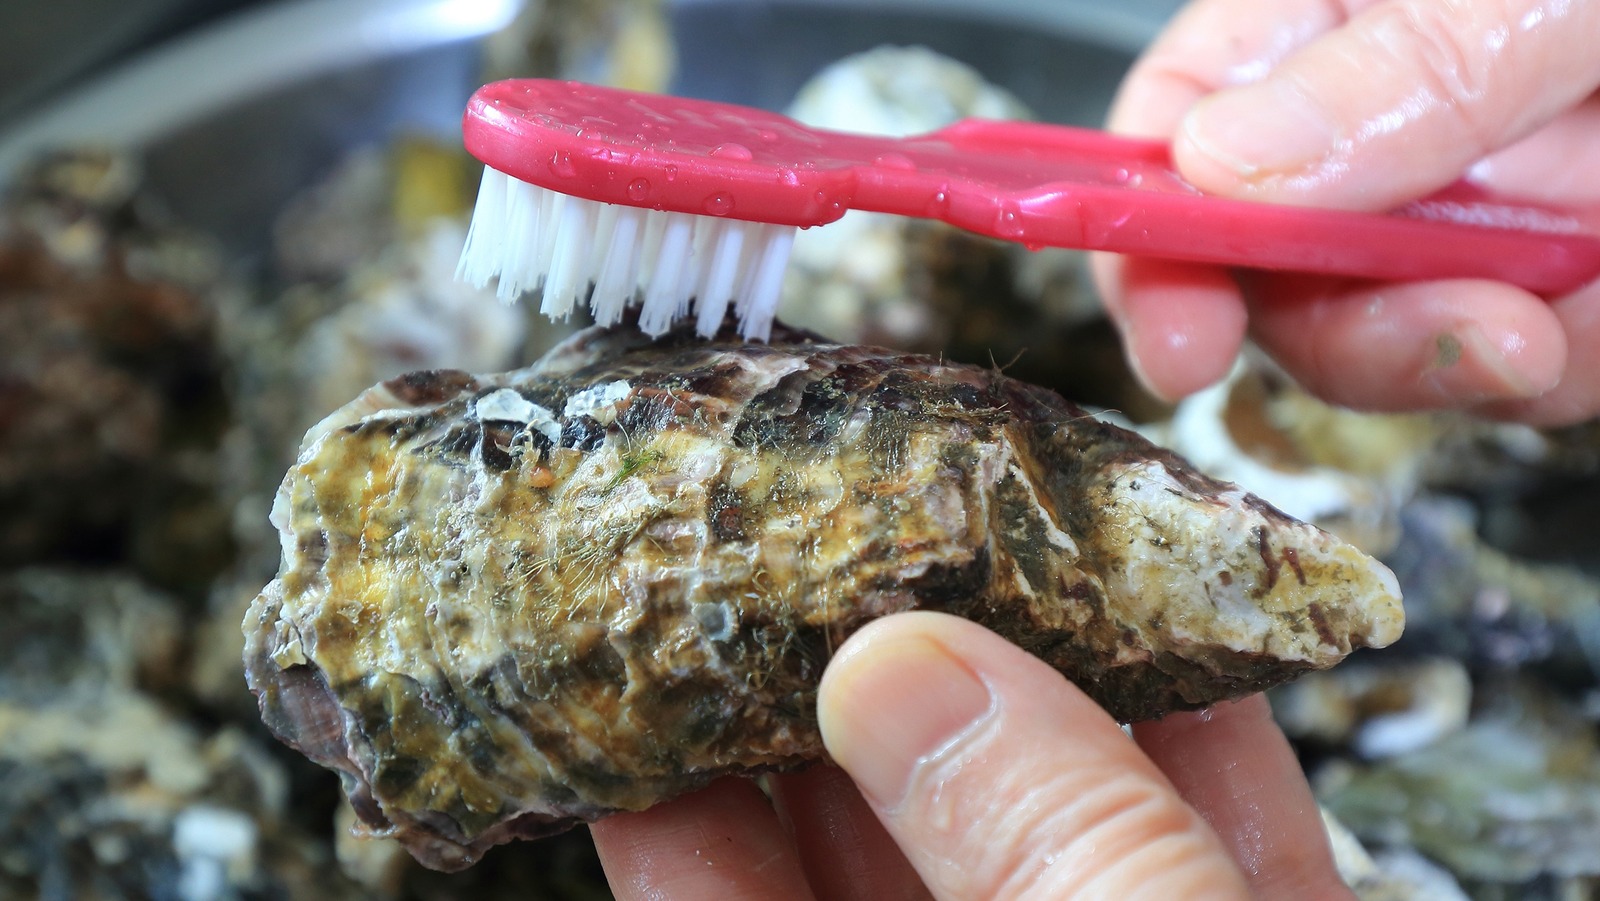 https://www.thedailymeal.com/img/gallery/whats-the-best-way-to-clean-oysters-before-shucking/l-intro-1681247189.jpg